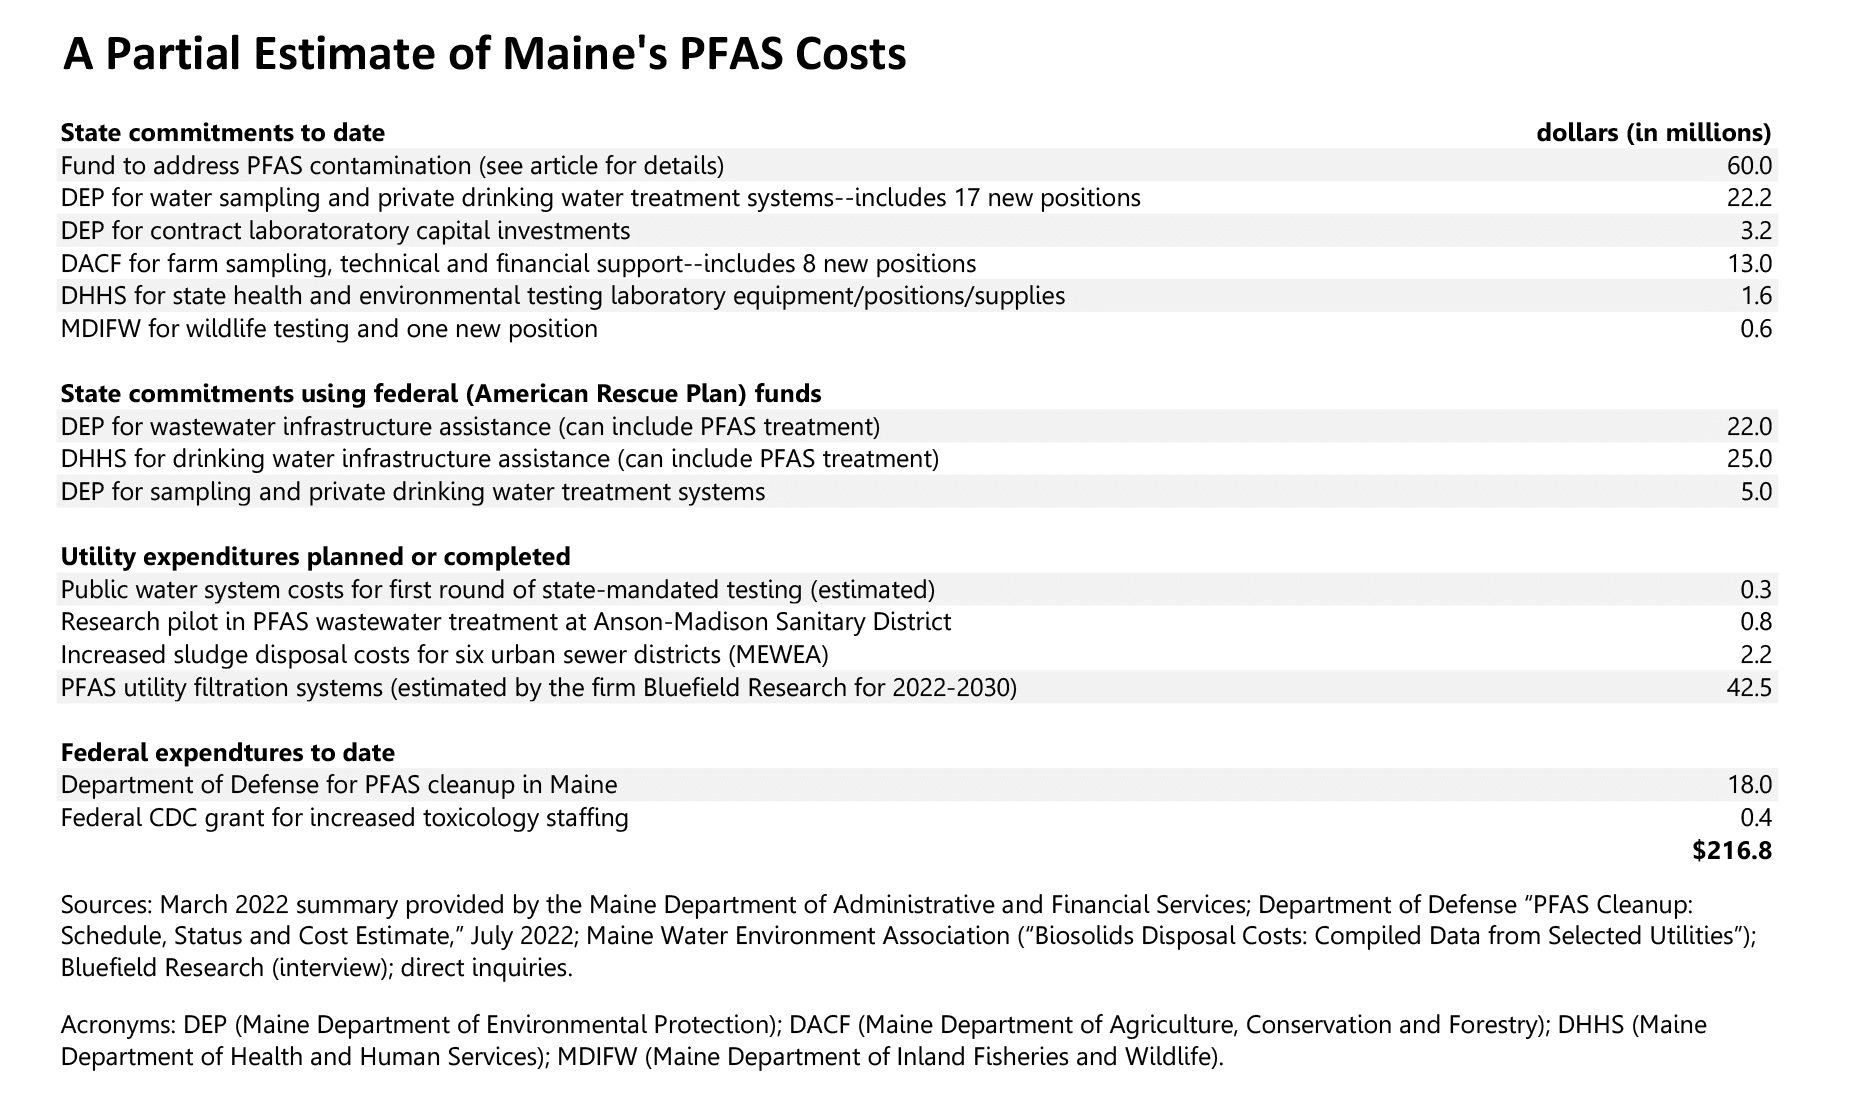 A chart detailing a partial estimate of Maine's PFAS costs. To date, the state has committed $60 million to a fund to address PFAS contamination; $22.2 million for water sampling and private drinking water treatment systems including 17 new positions; $3.2 million for contract laboratoratory capital investments; $13 million for farm sampling, technical and financial support including eight new positions; $1.6 million for state and environmental testing laboratory equipment, positions, supplies; and $600,000 for wildlife testing and one new position. The state has also committed funds through the federal American Rescue Plan including $22 million for wastewater infrastructure assistance; $25 million for drinking water infrastructure assistance; and $5 million for sampling and private drinking water treatment systems. Utility expenditures planned or completed include $300,000 for public water system costs for first round of state-mandated testing; $800,000 for research pilot in PFAS wastewater treatment at Anson-Madison Sanitary District; $2.2 million in increased sludge disposal costs for six urban sewer districts; and $42.5 million for PFAS utility filtration systems. Federal expenditures to date include $18 million from the Department of Defense for PFAS cleanup in Maine and $400,000 from the US CDC for increased toxicology staffing. Thus, the total partial estimate of Maine's PFAS costs total $216.8 million.